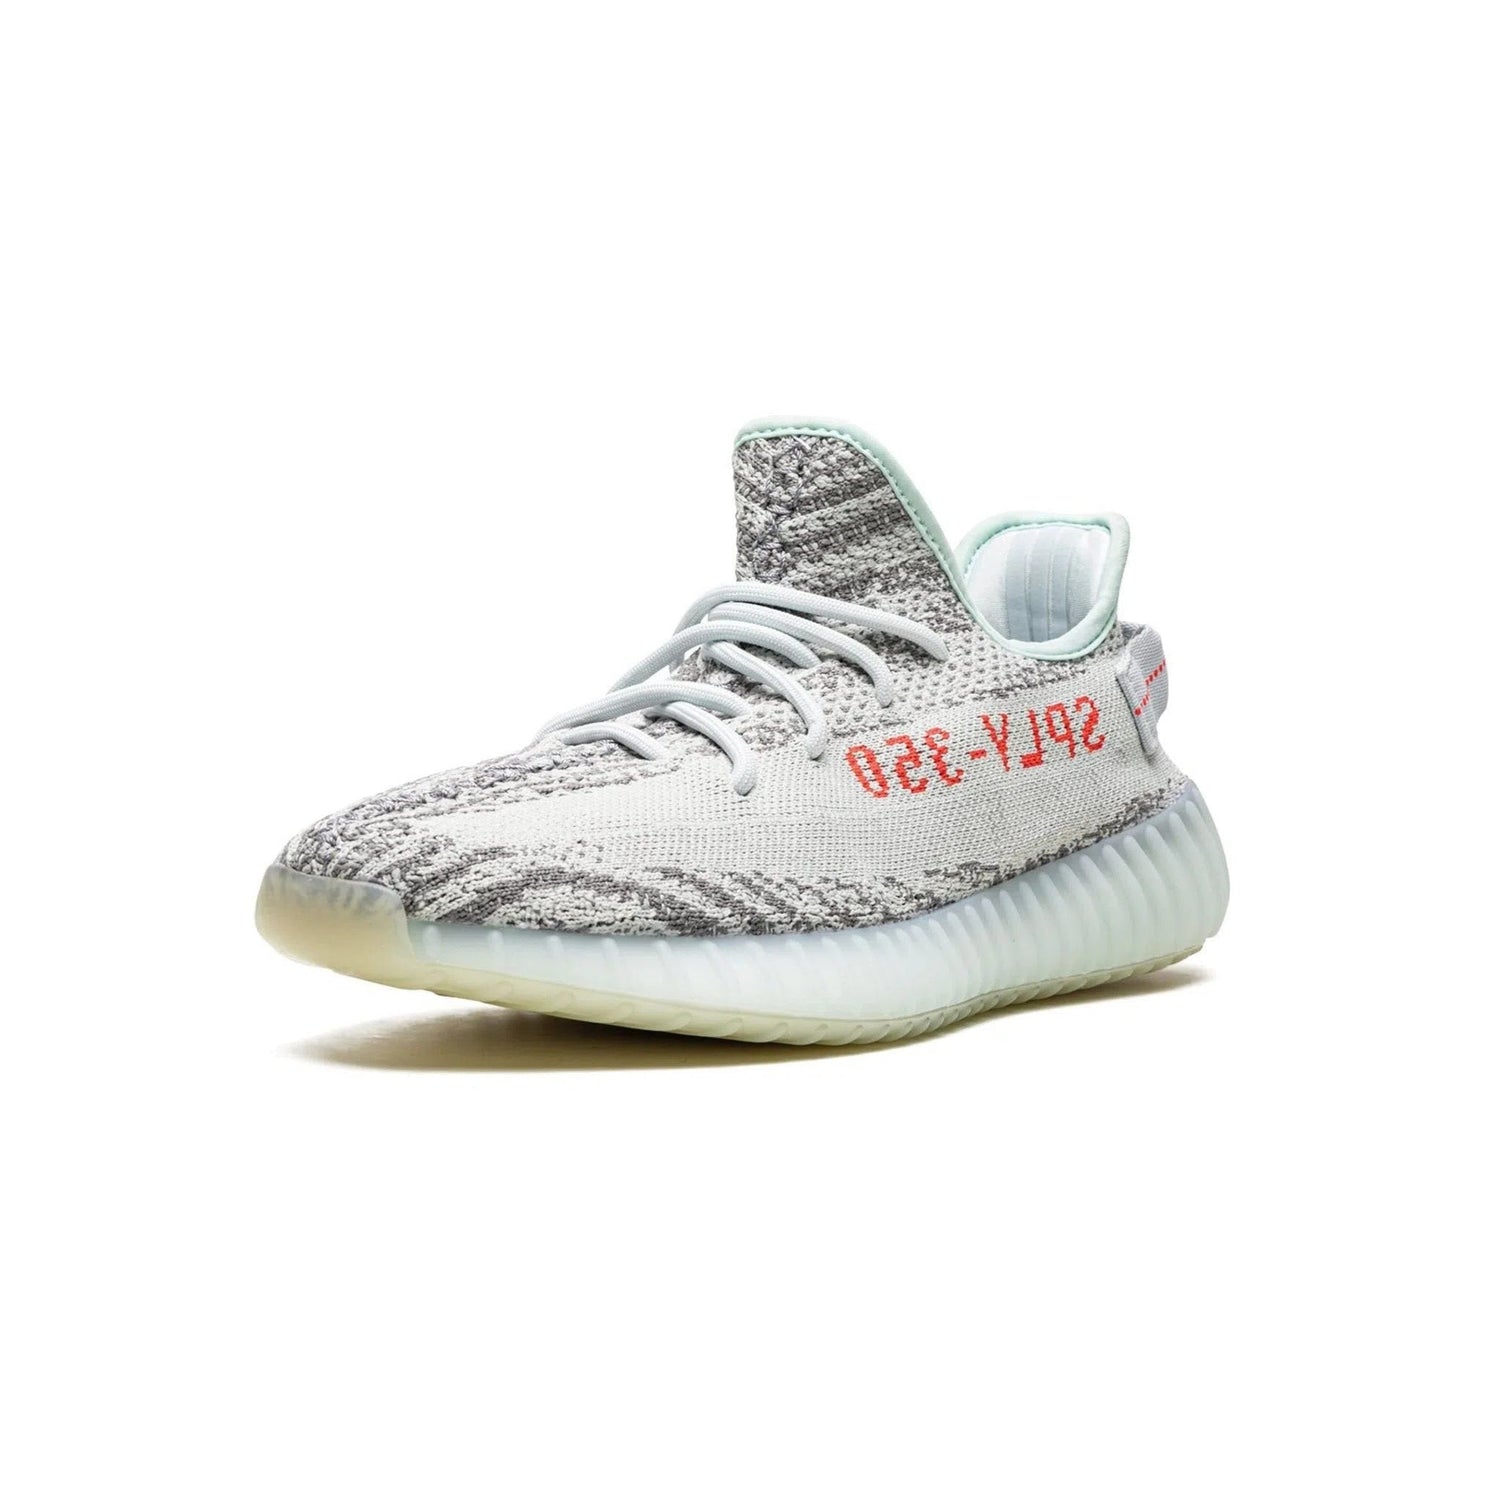 Yeezy Boost 350 V2 - Blue Tint-LOTABY